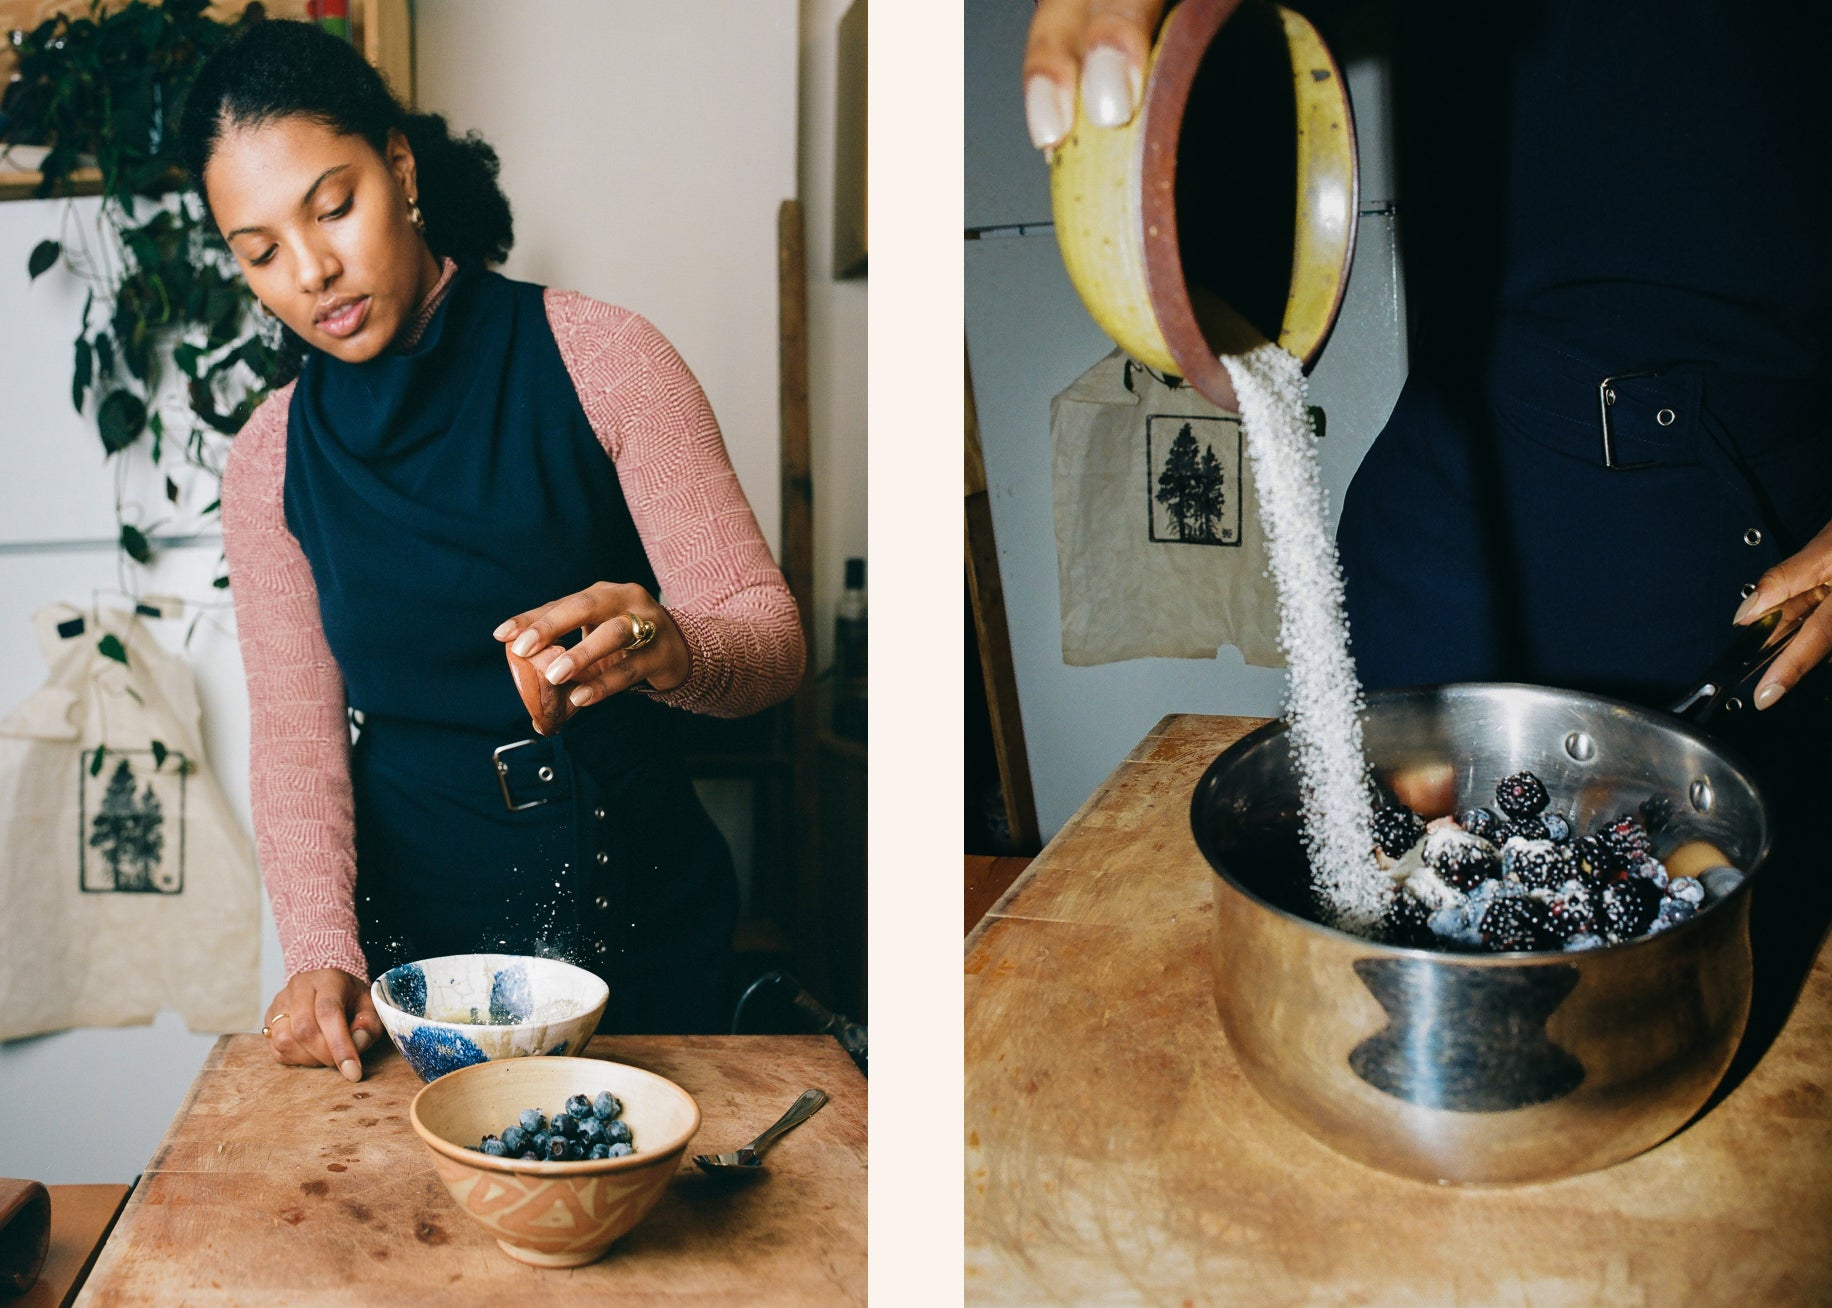 On the left, Chef Tara juicing an orange in a bowl. On the right. Chef Tara pouring sugar into a pot filled with berries. 